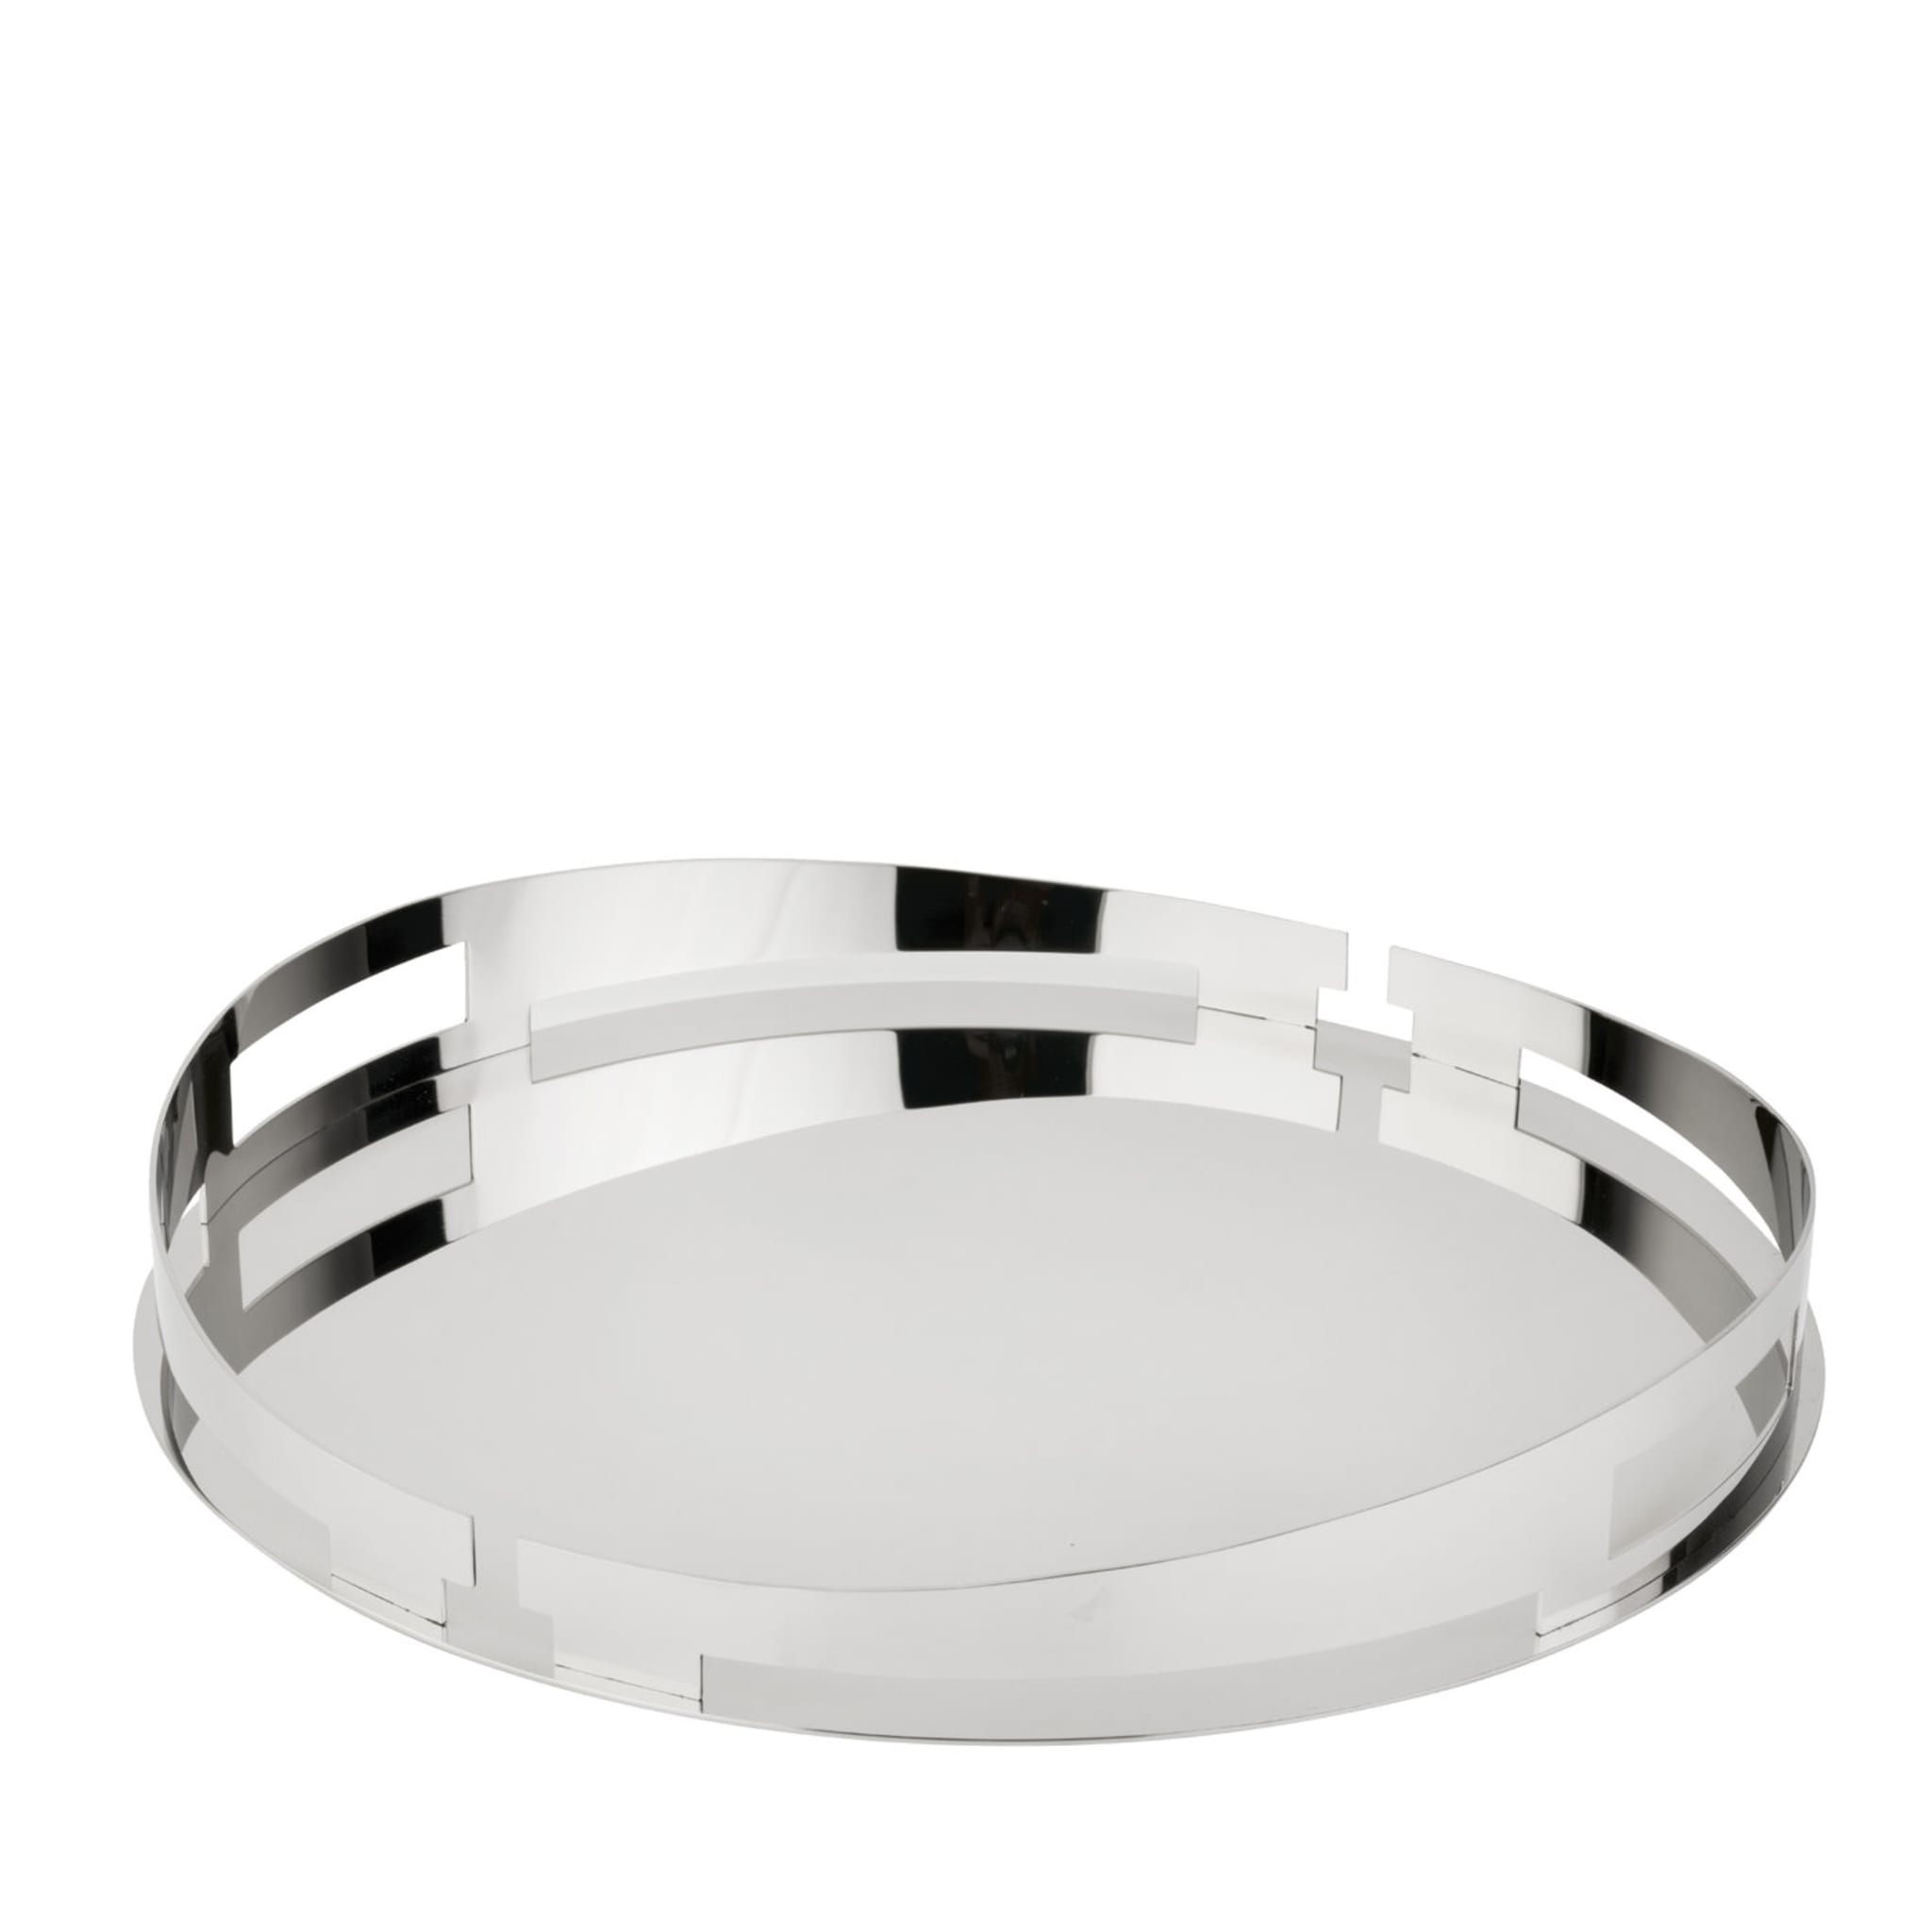 Round Stainless Steel Tray - Main view